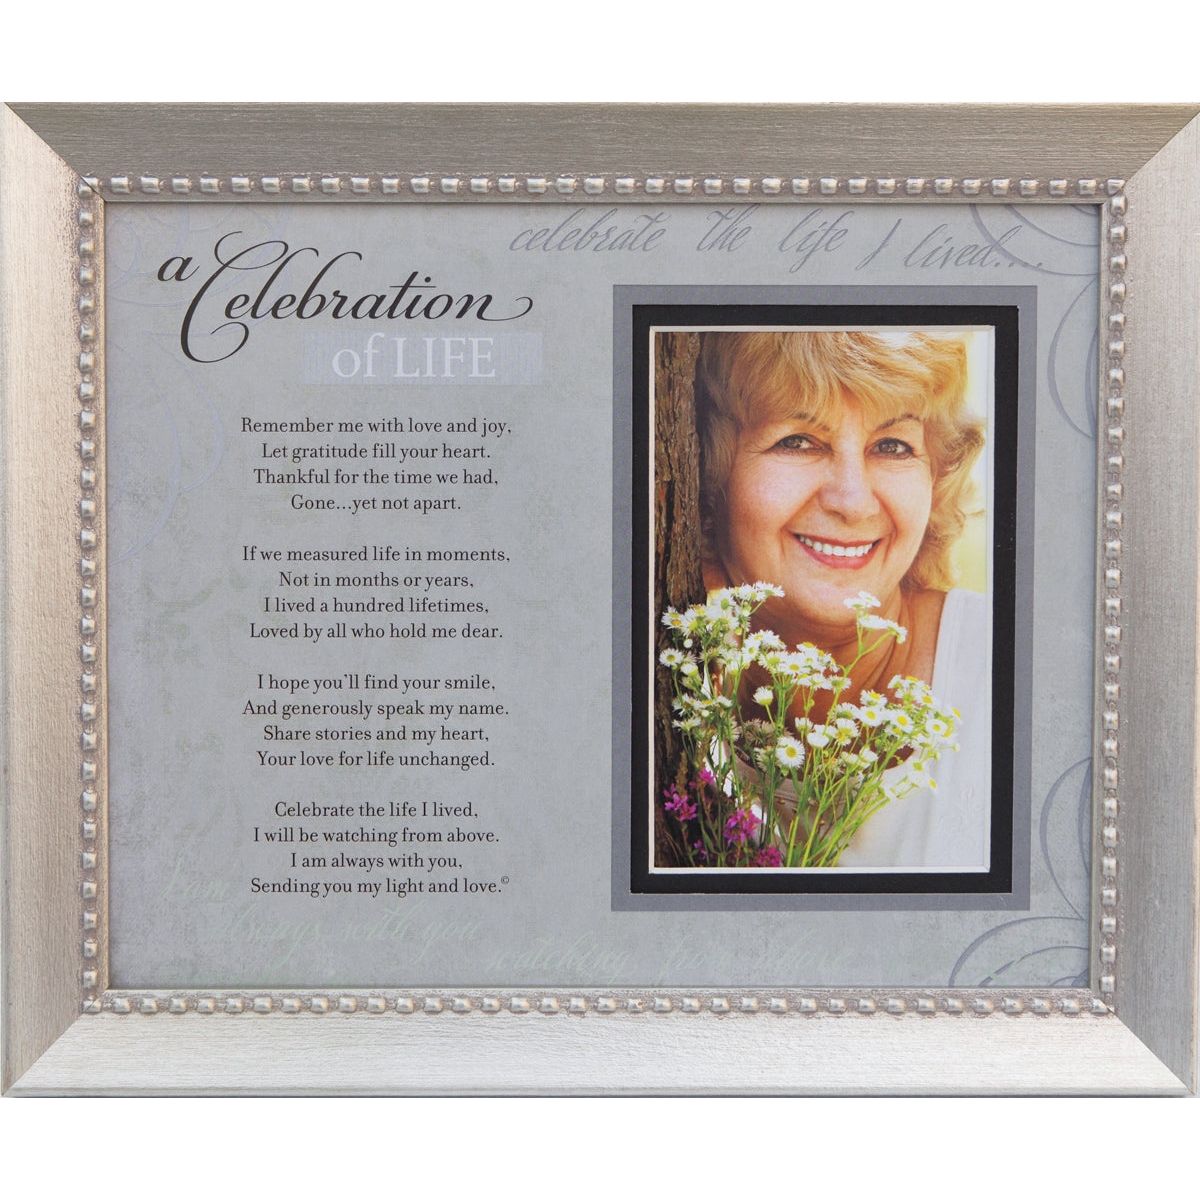 8x10 silver-toned beaded wood frame with &quot;Celebration of Life Memorial&quot; poem and opening for 3.5&quot;x5&quot; or 4&quot;x6&quot; photo.